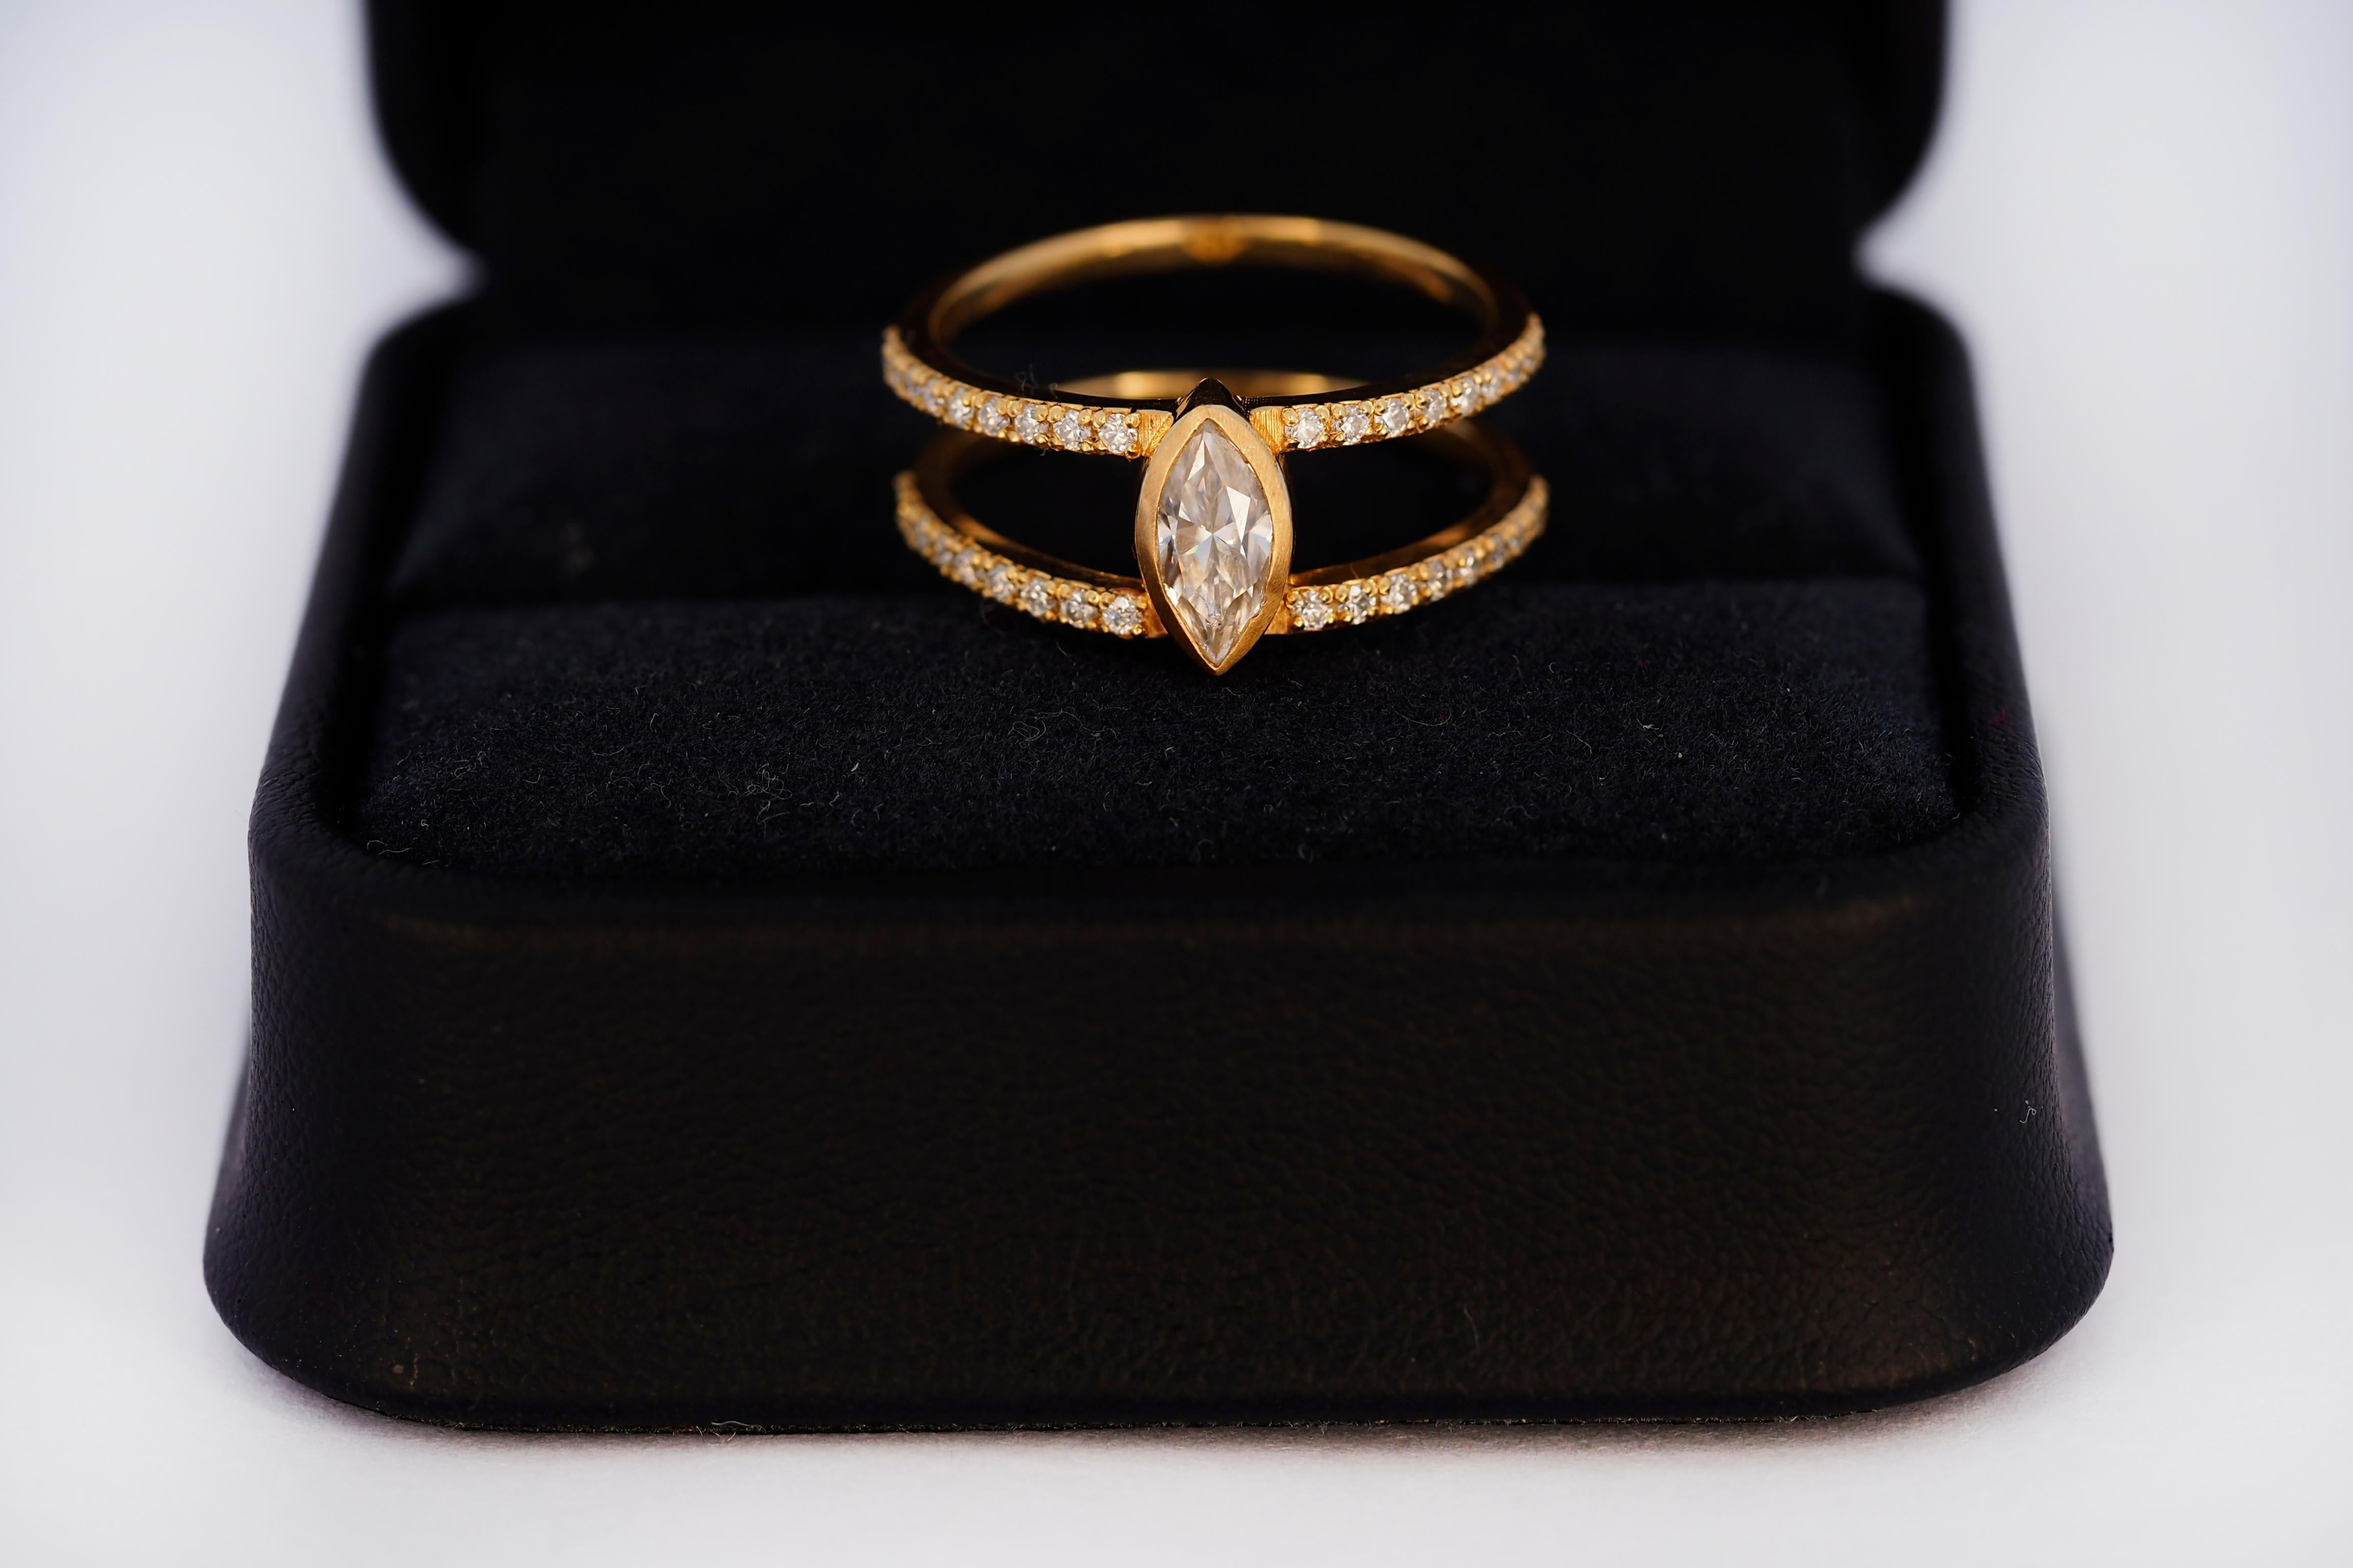 For Sale:  1 ct Marquise moissanite engagement ring in 14k gold.  8